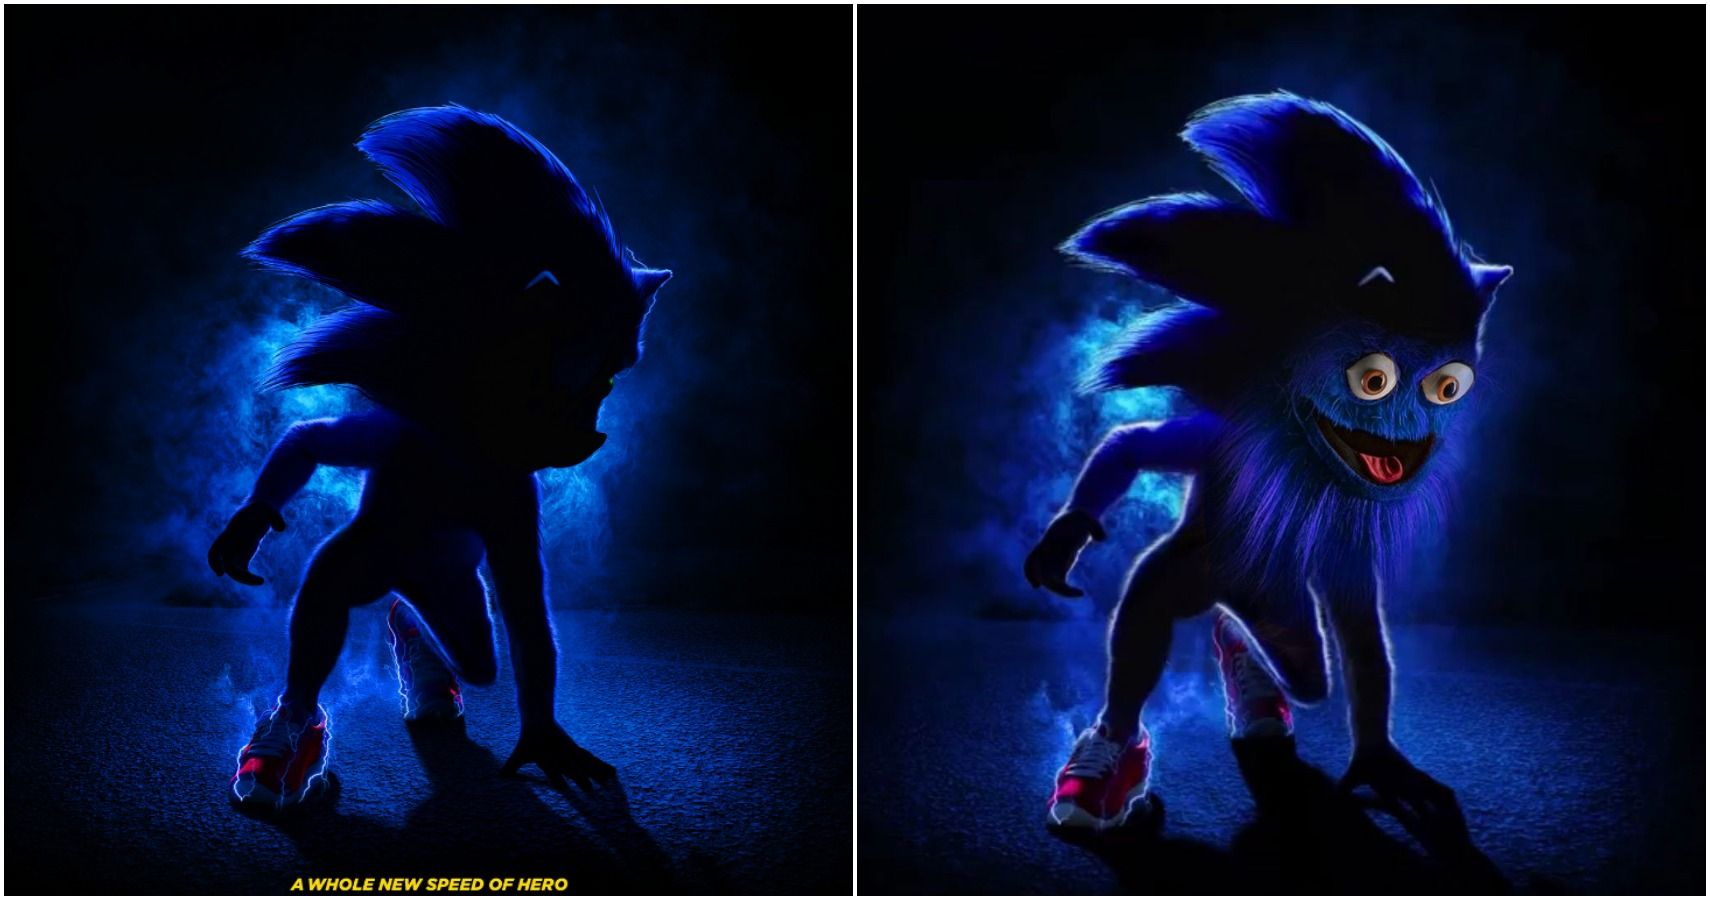 Sonic the Hedgehog Live-Action Movie Poster Sparks Memes